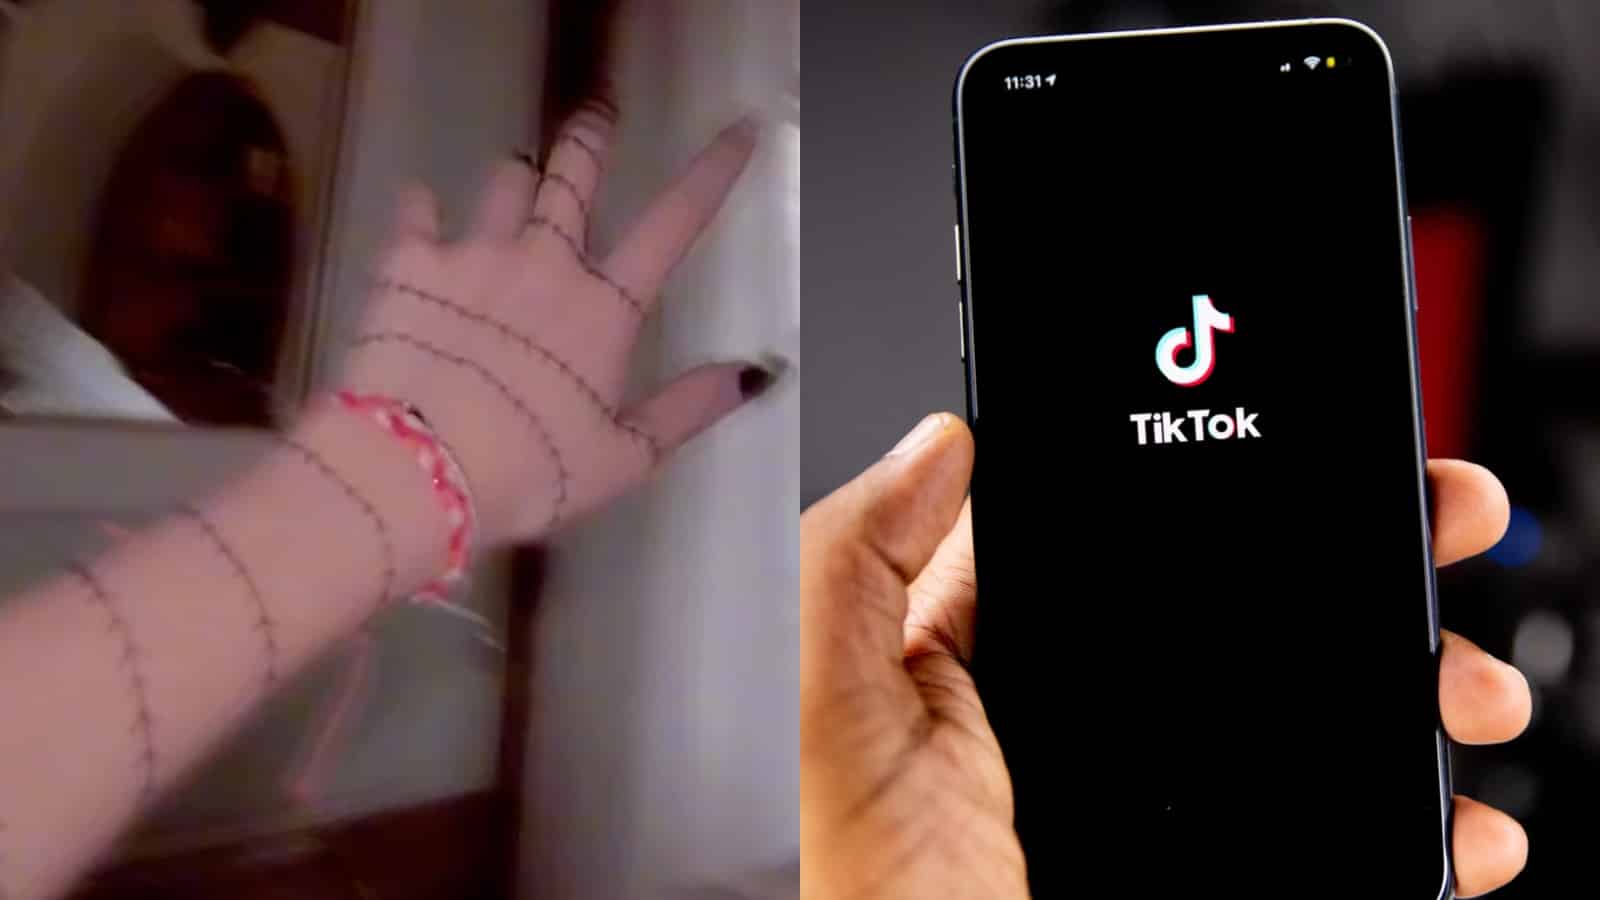 A hand next to a phone with the TikTok logo on